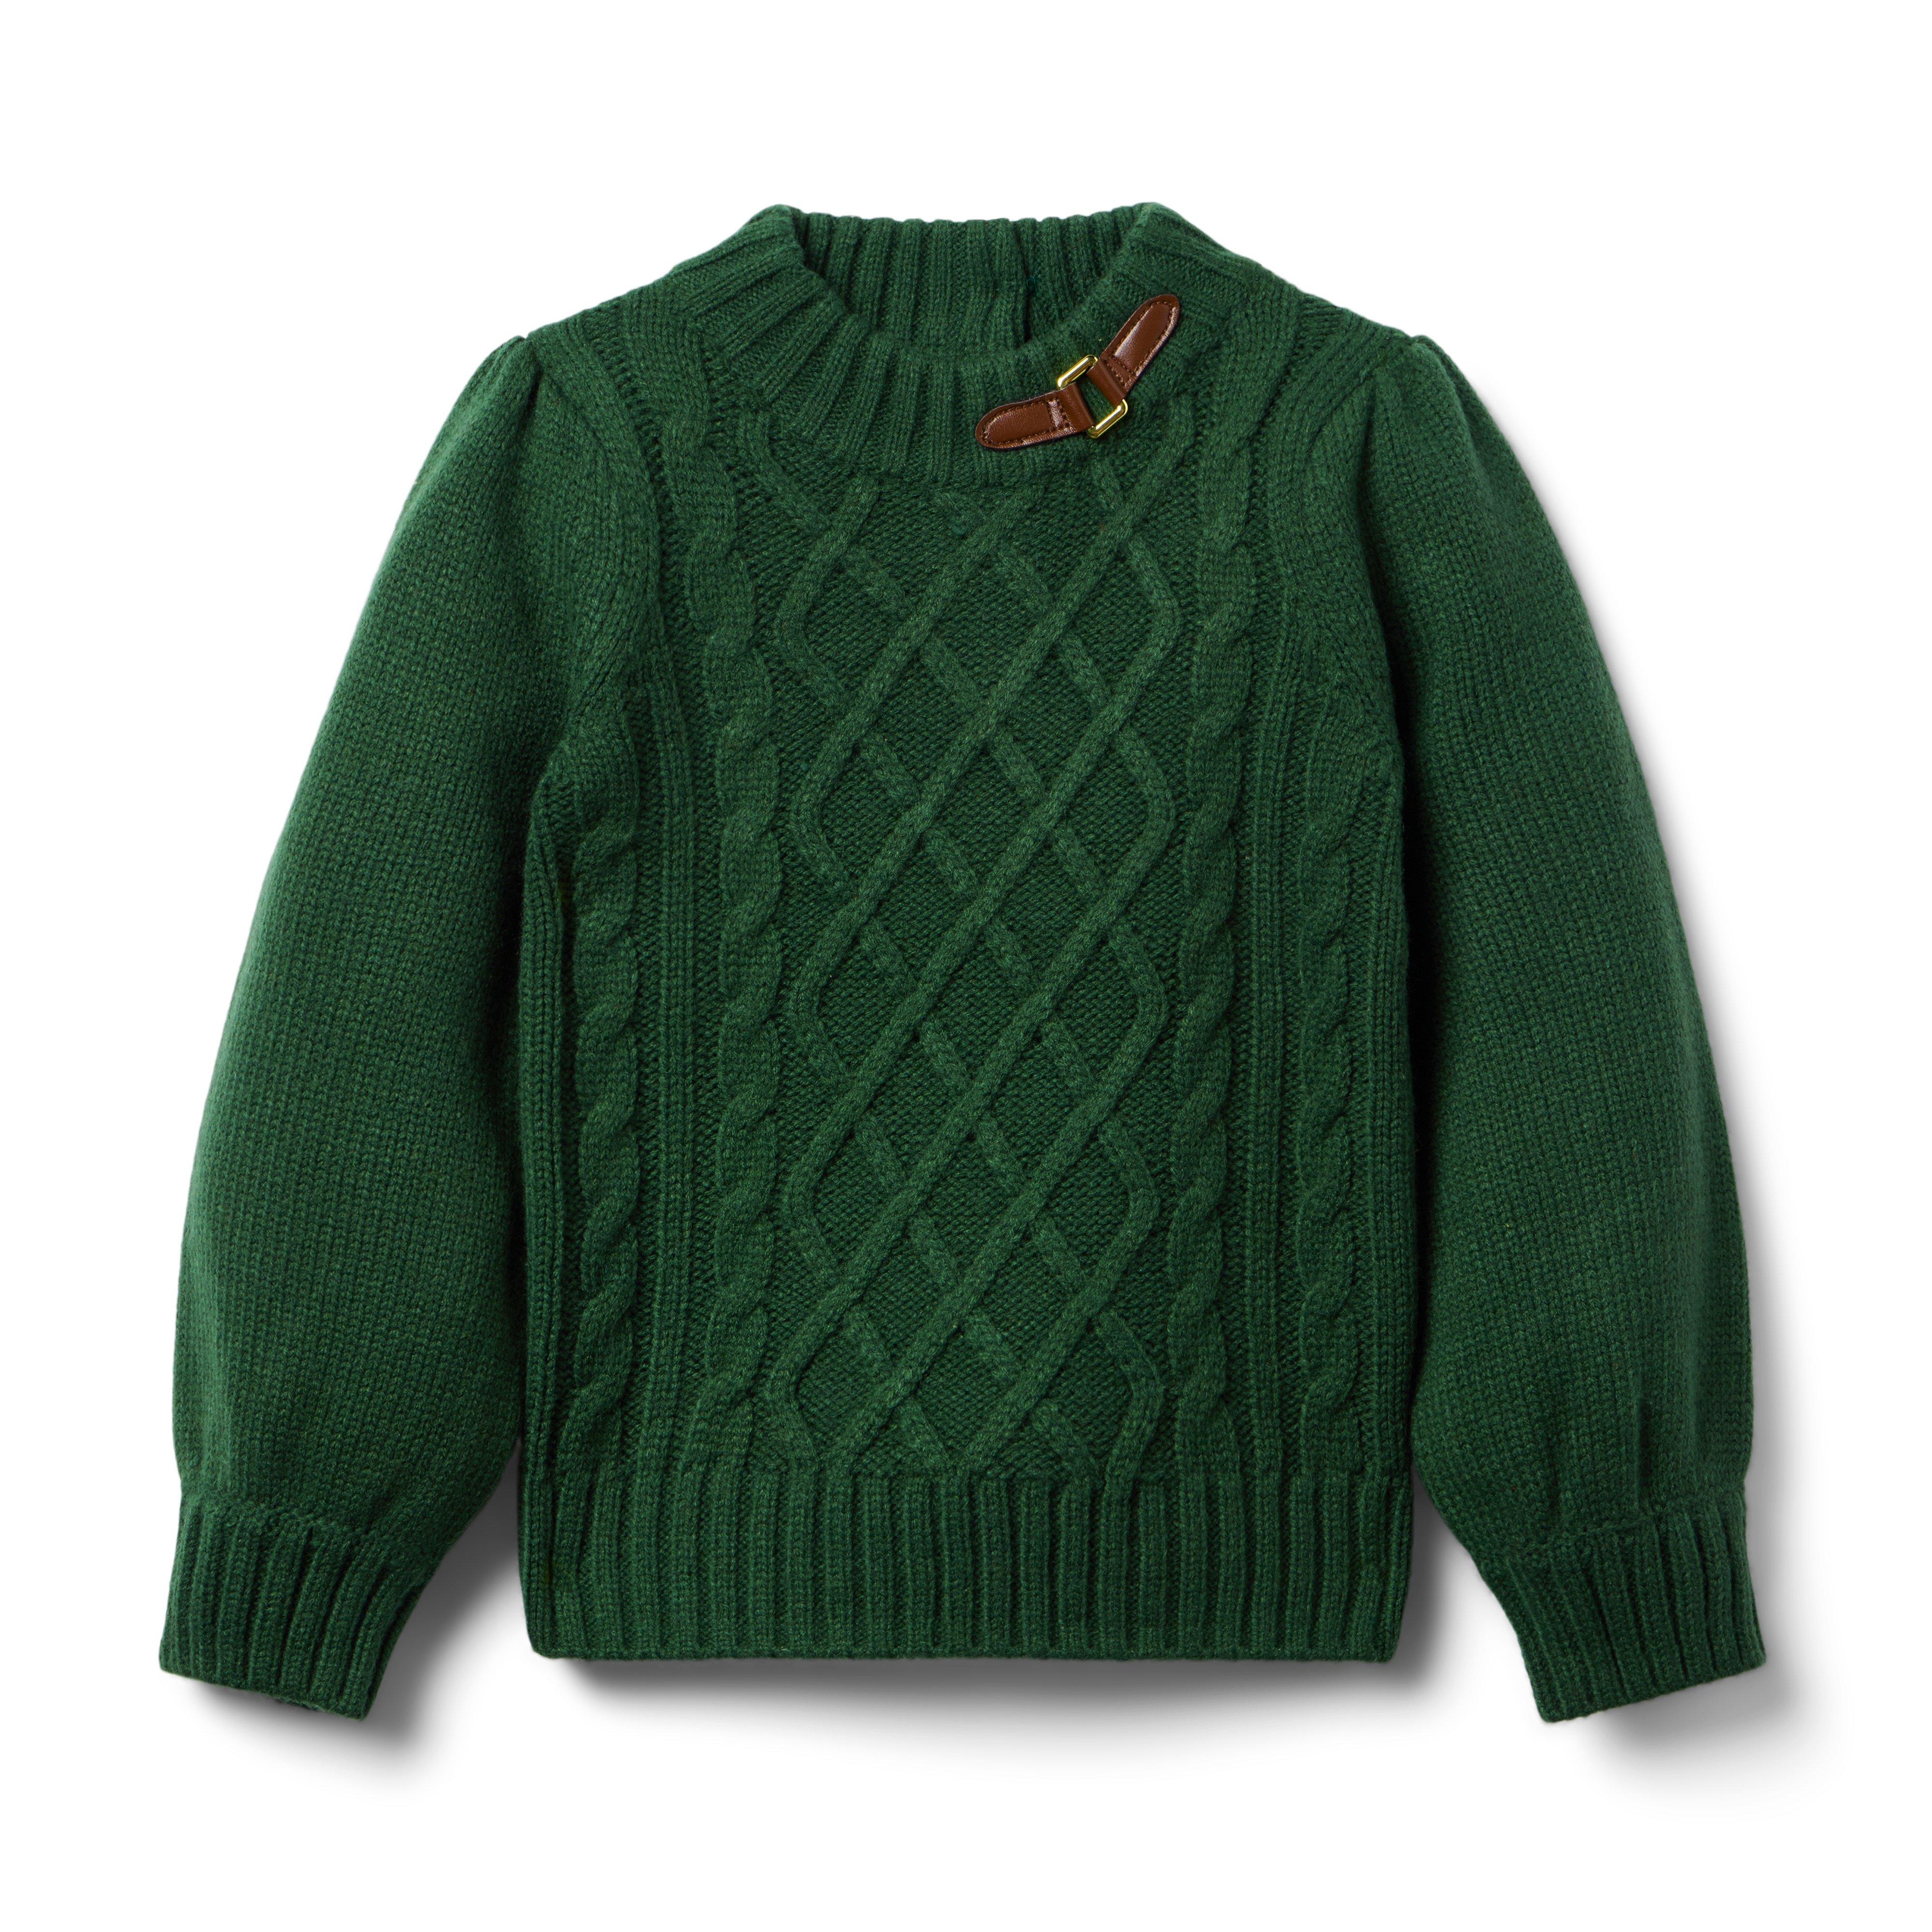 The Equestrian Cable Sweater